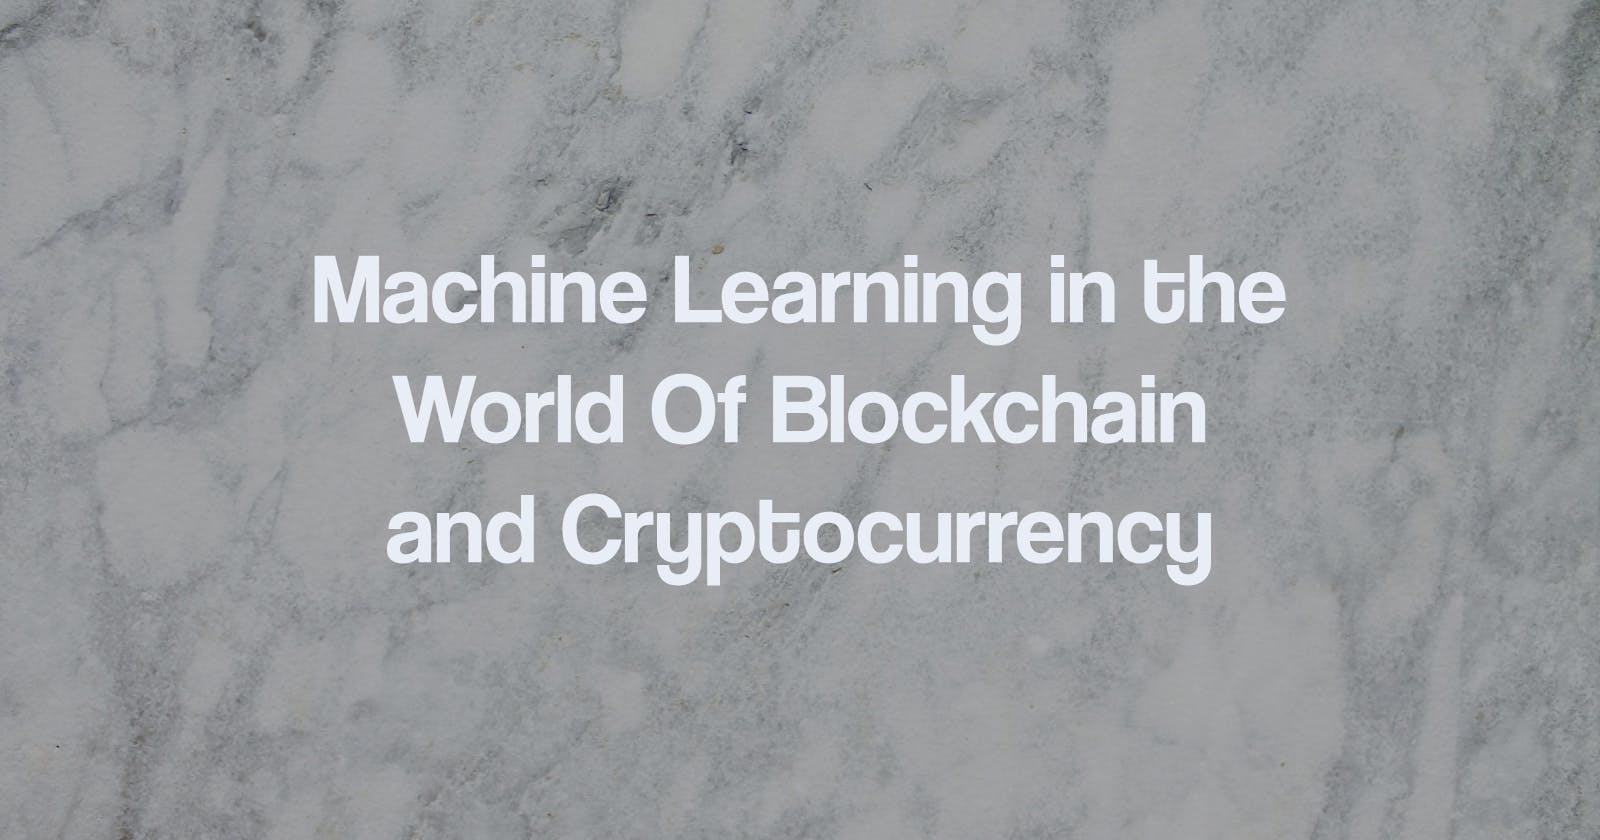 Machine Learning in the World Of Blockchain
and Cryptocurrency